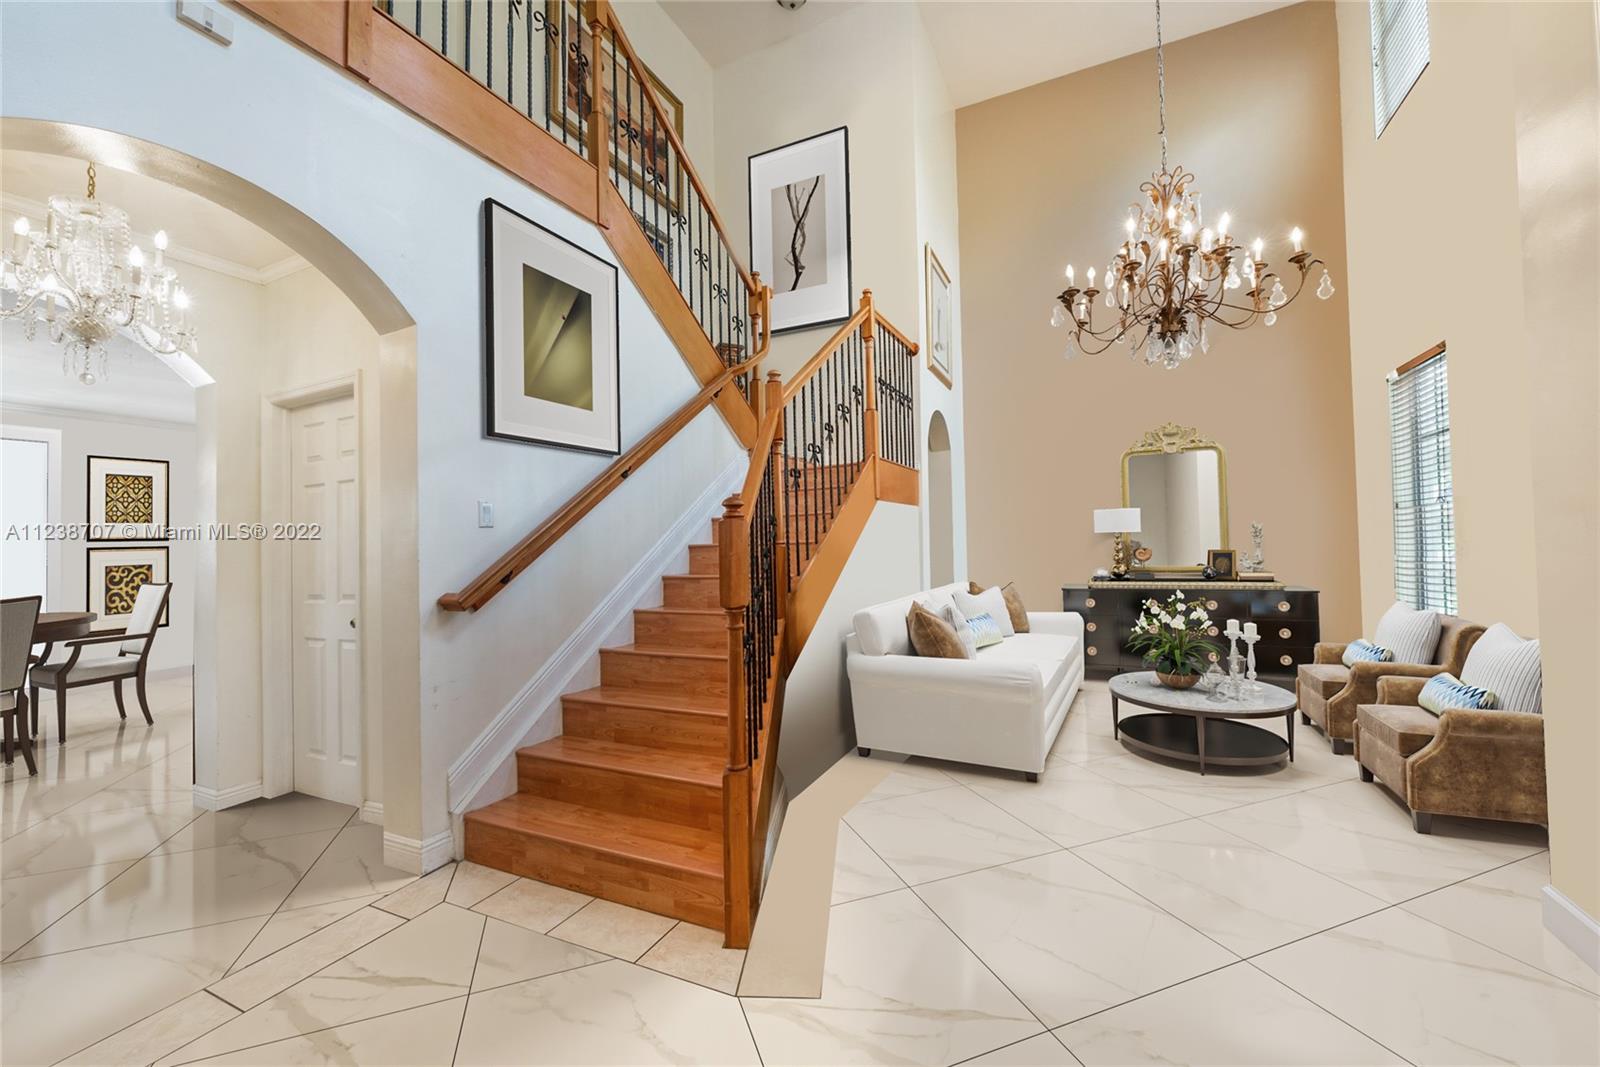 Grand staircase, volume ceiling. Can be used as a formal living room, a family room or a formal dining room (staged image)